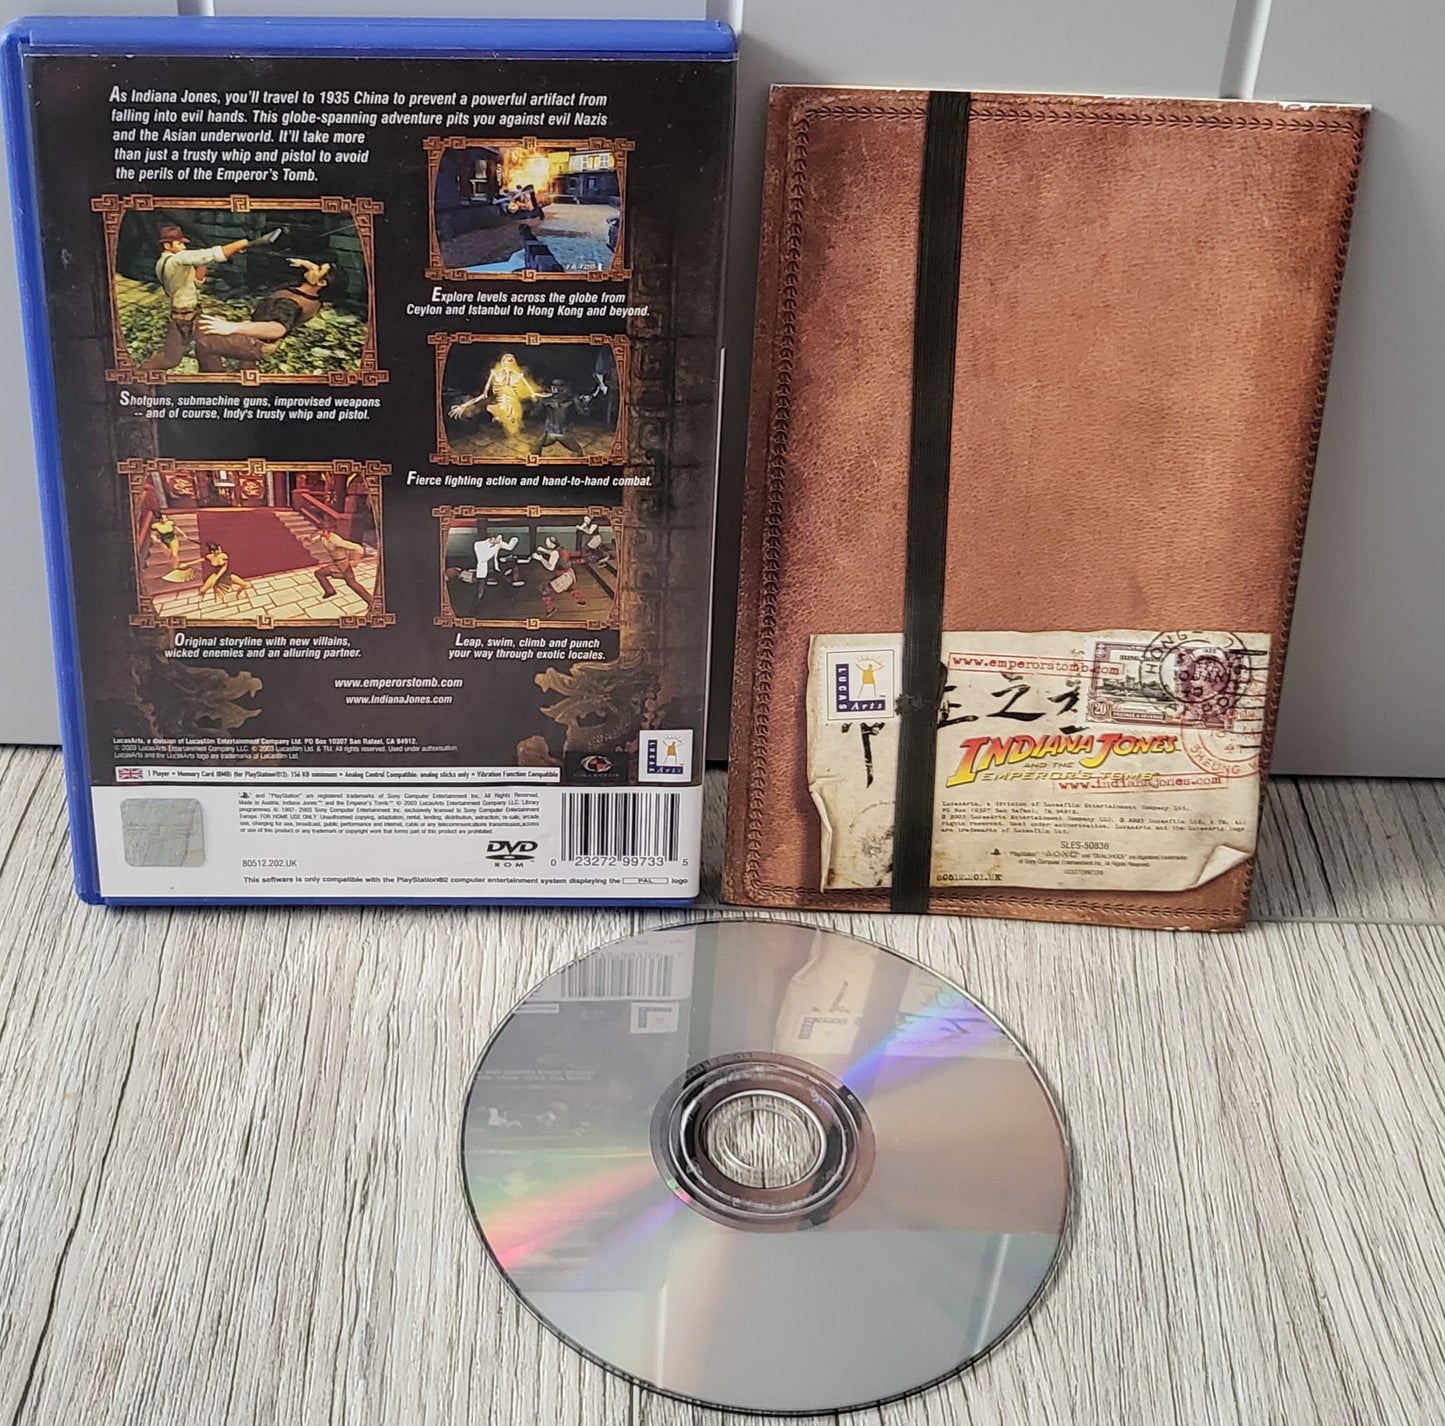 Indiana Jones and the Emperor's Tomb Sony Playstation 2 (PS2) Game